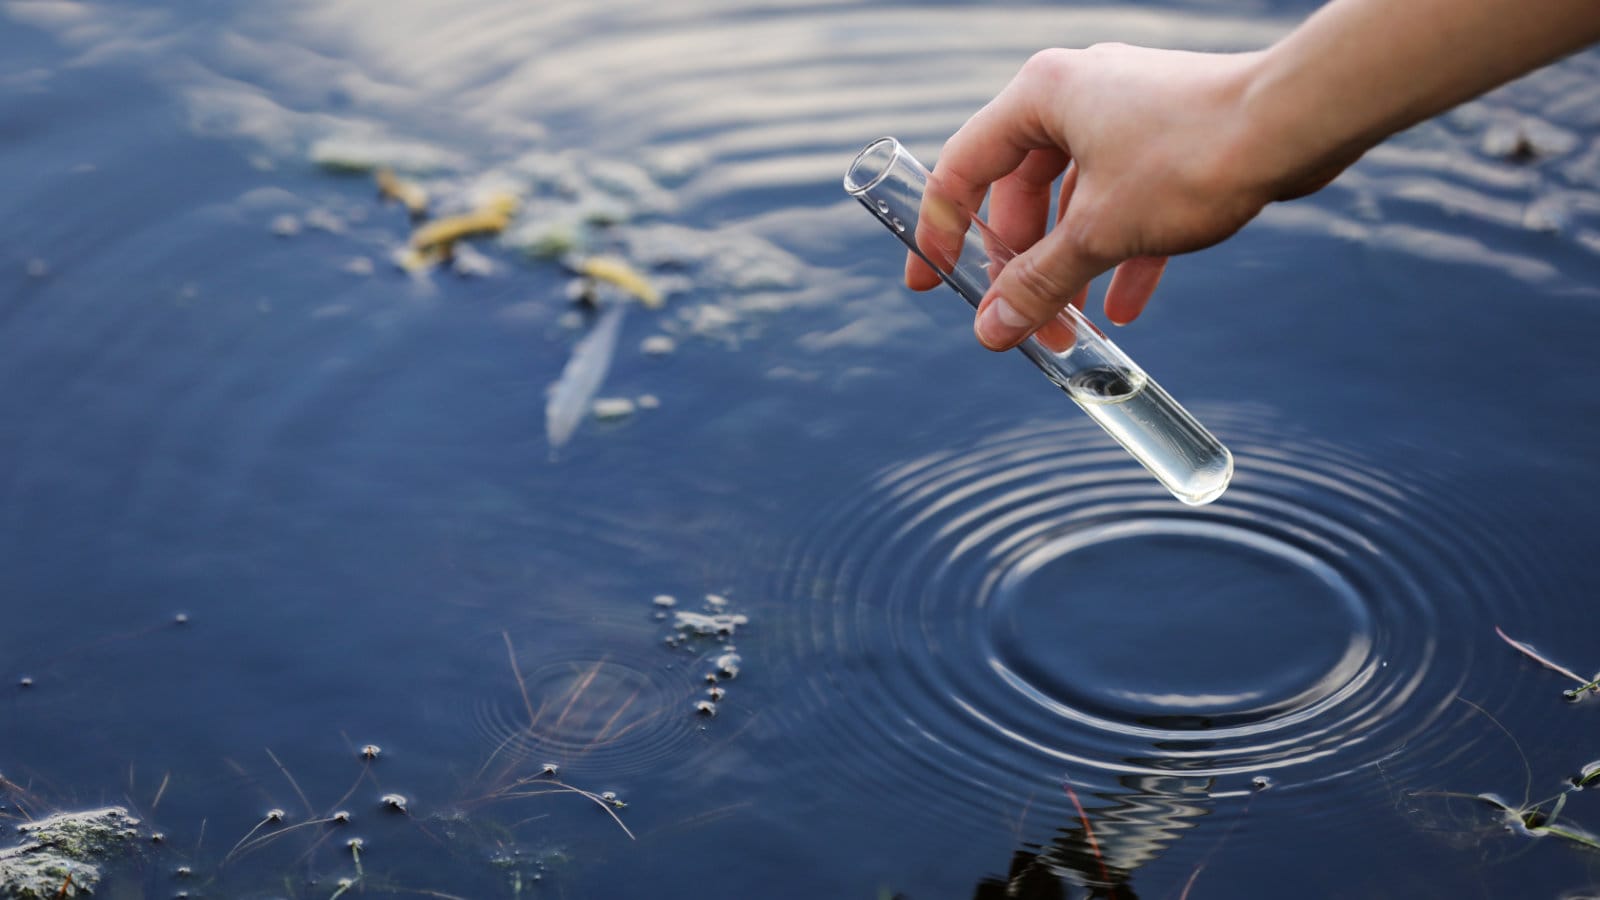 Close-up of a person’s hand holding a clear test tube to collect a water sample from a natural body of water, illustrating water quality testing and analysis.